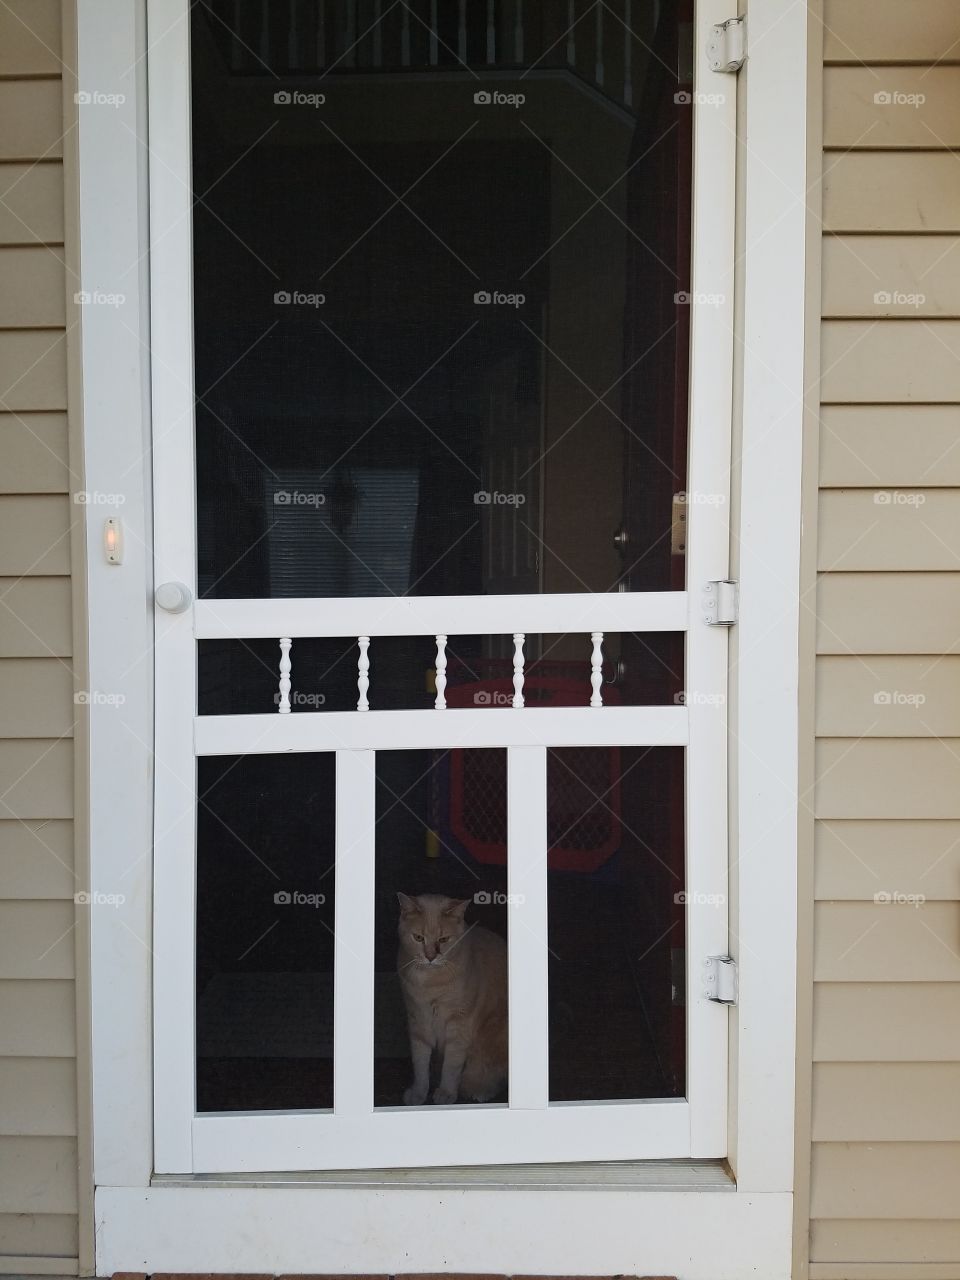 Someone wants out